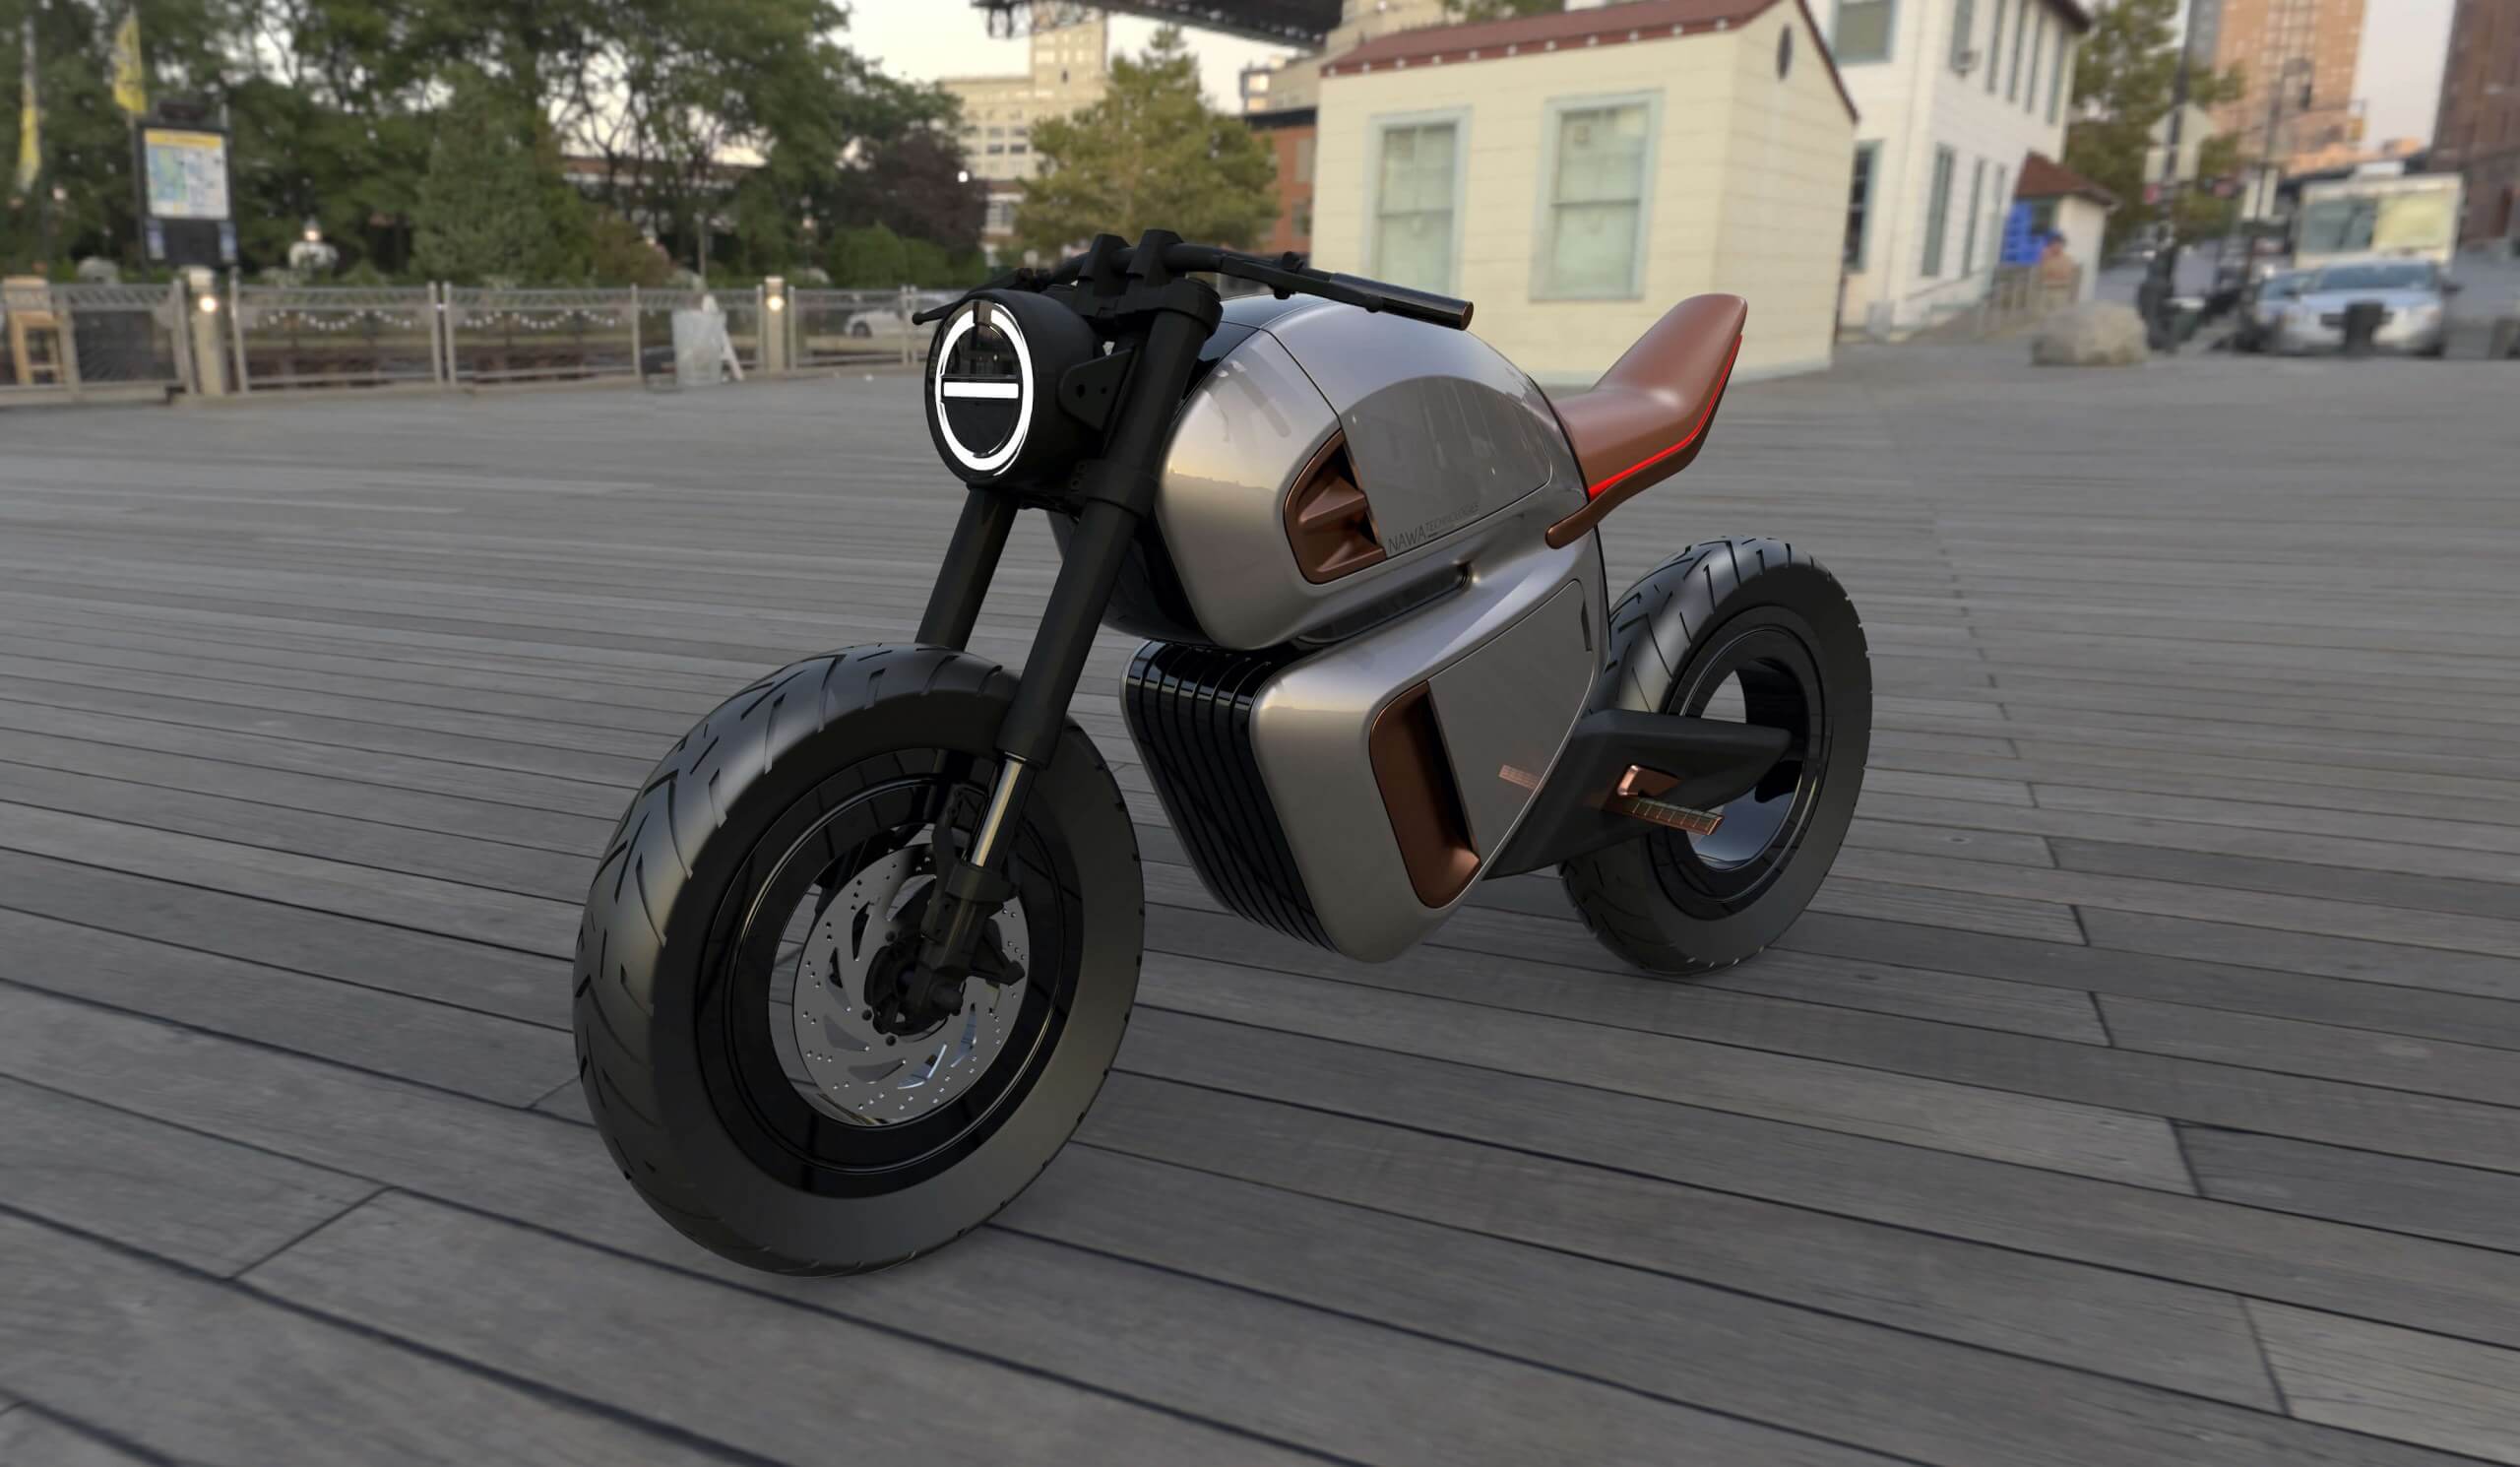 The Nawa Racer is an e-motorbike with an ultracapacitor significantly boosts its range